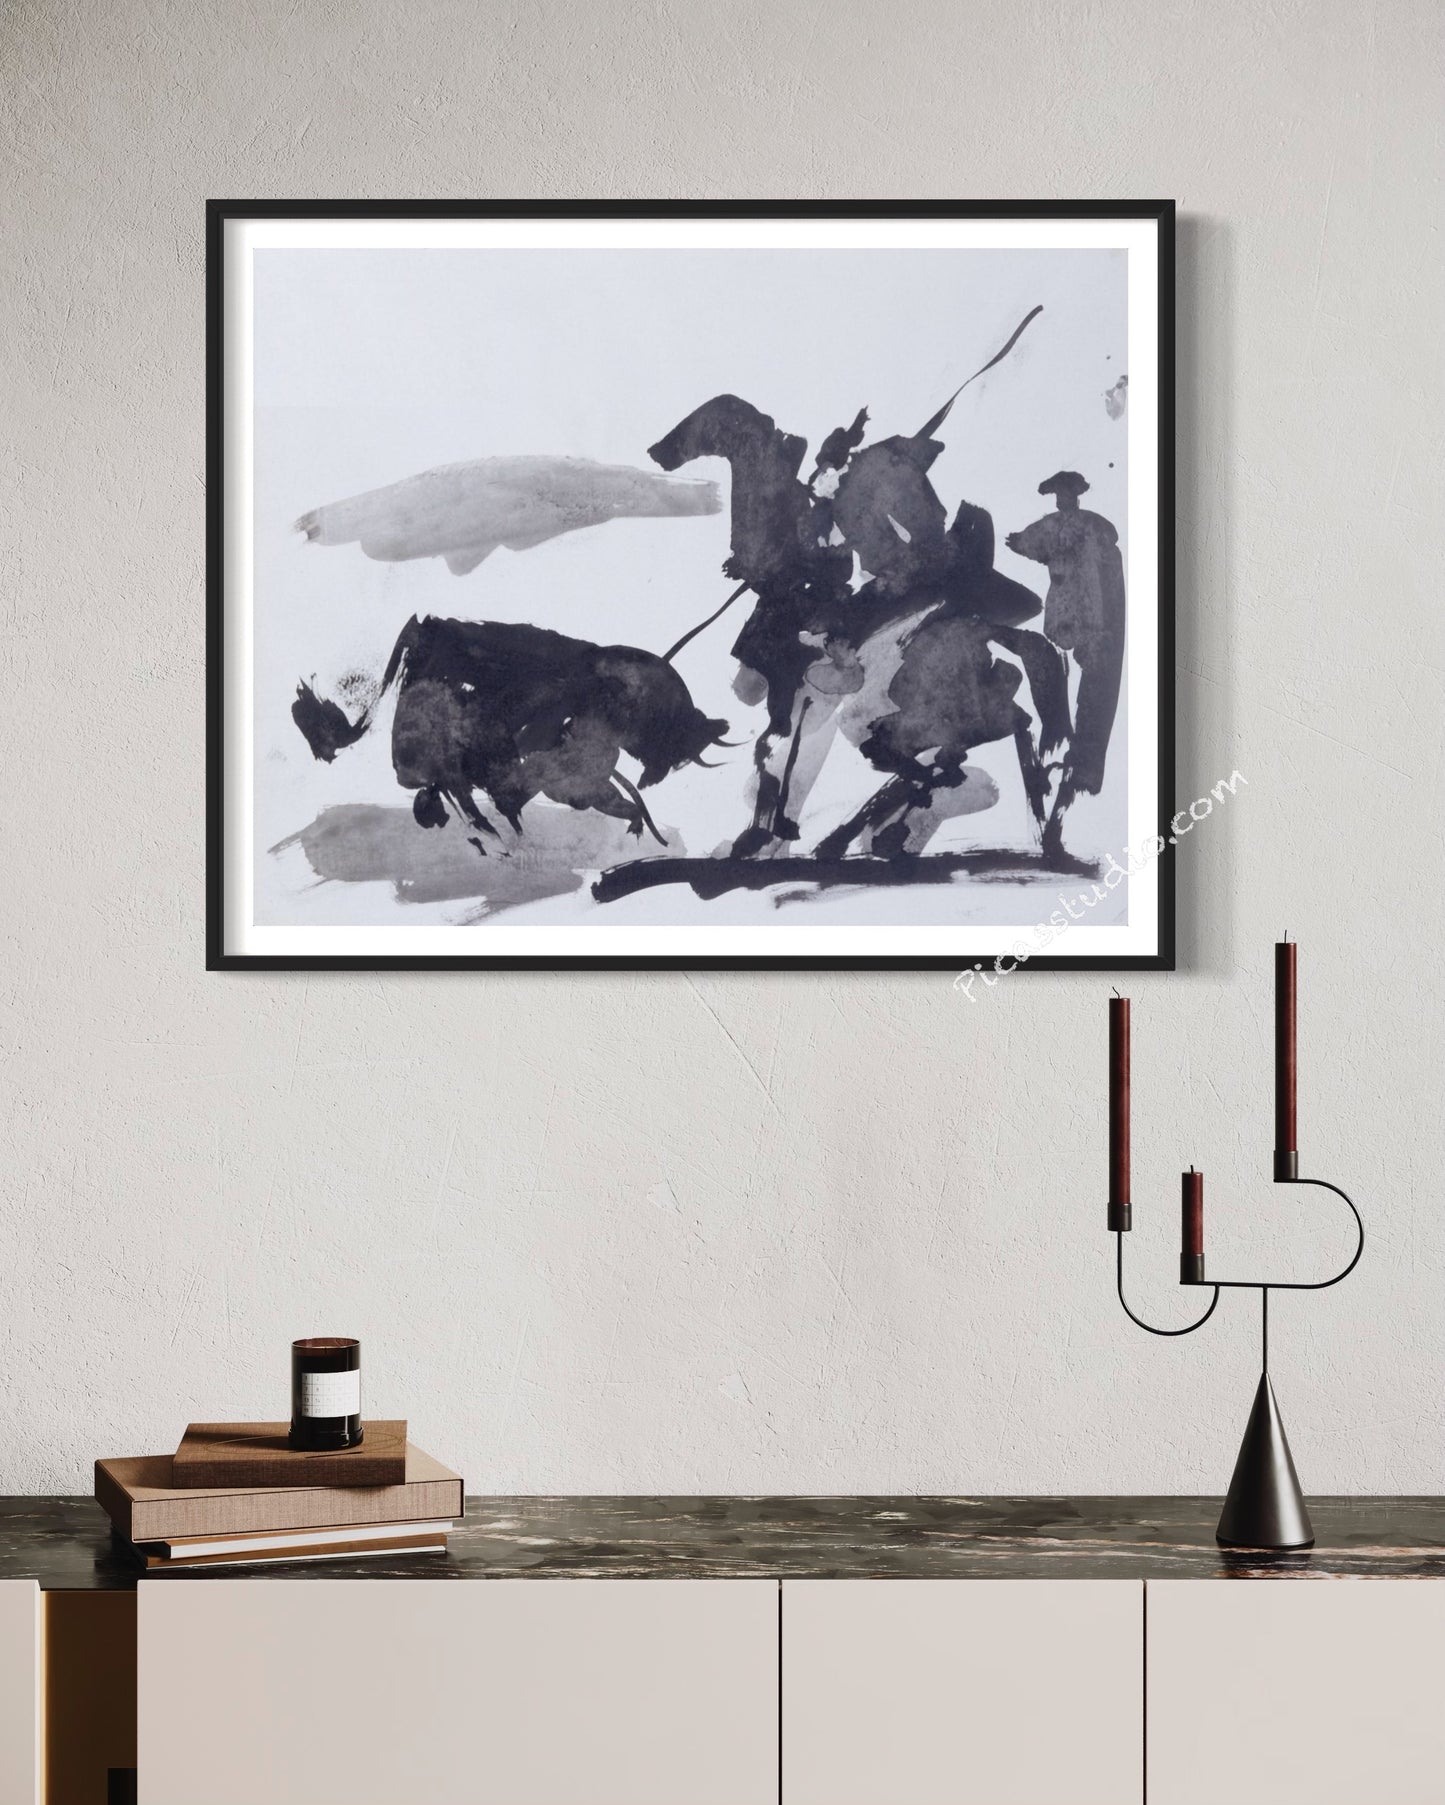 Pablo Picasso Oil Painting Bullfight Scene Hand Painted Art on Canvas Wall Decor Unframed